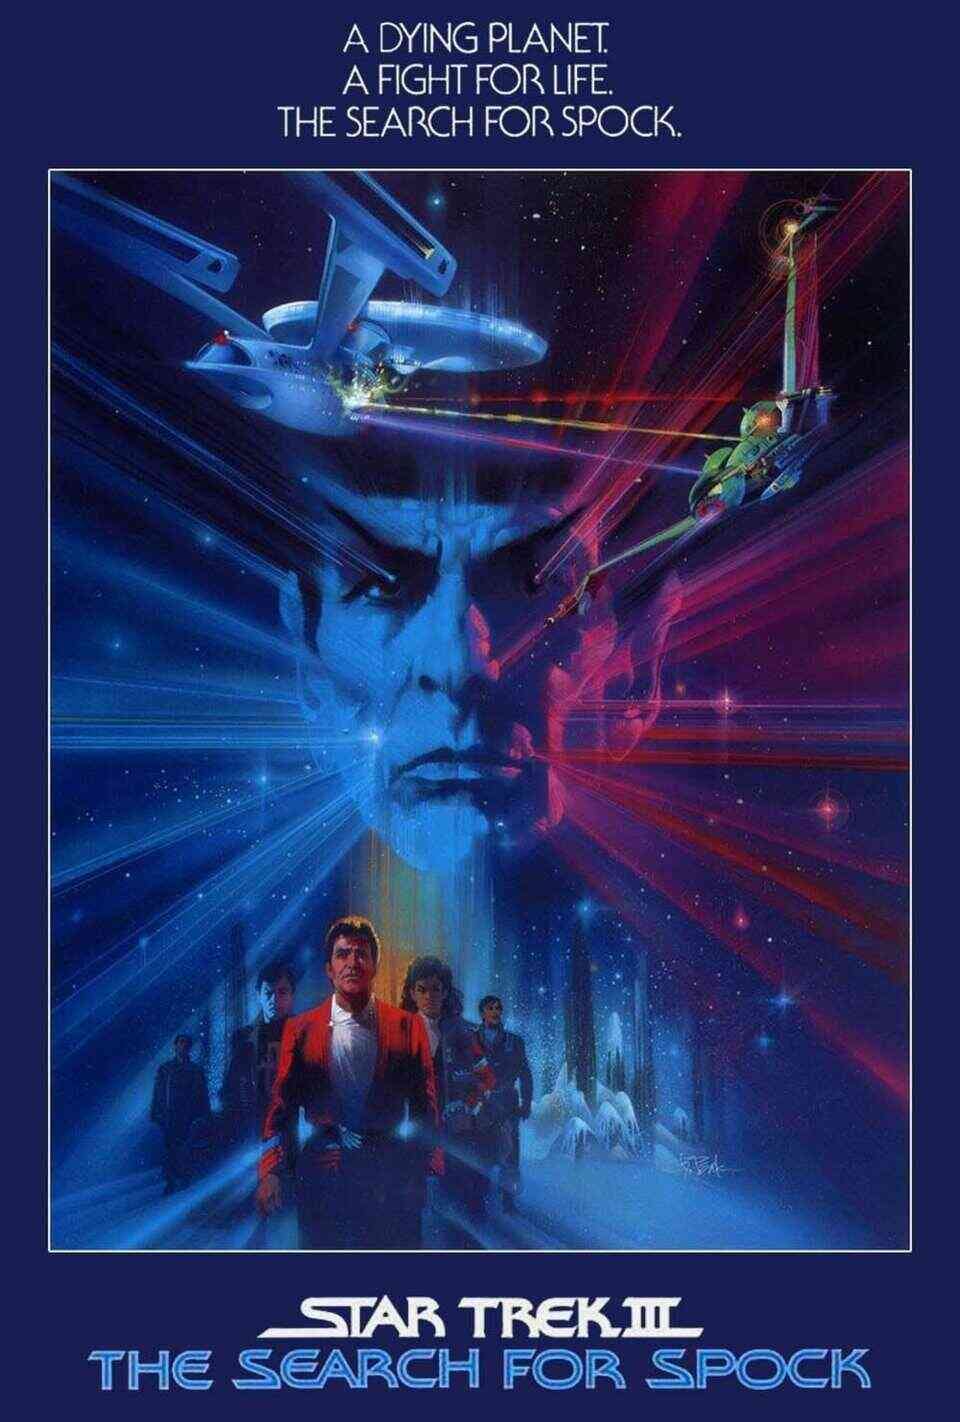 Read The Search for Spock screenplay (poster)